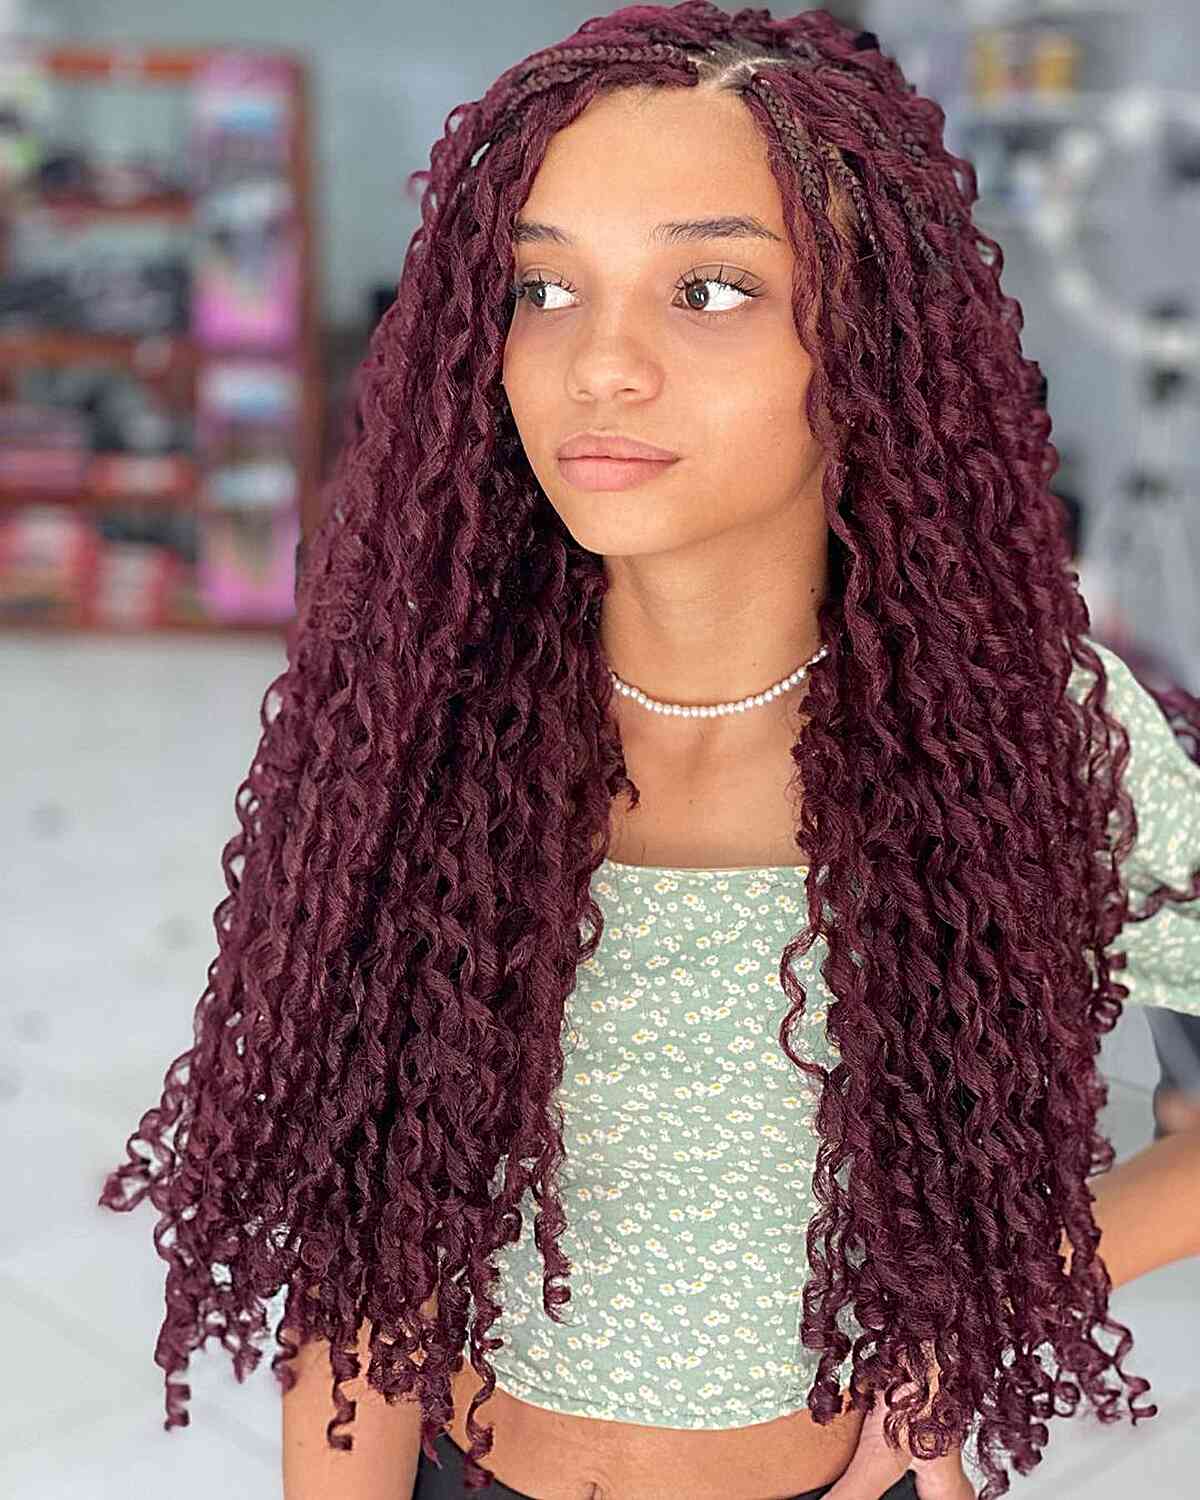 Long Side-Parted Burgundy Hair for African-American Women